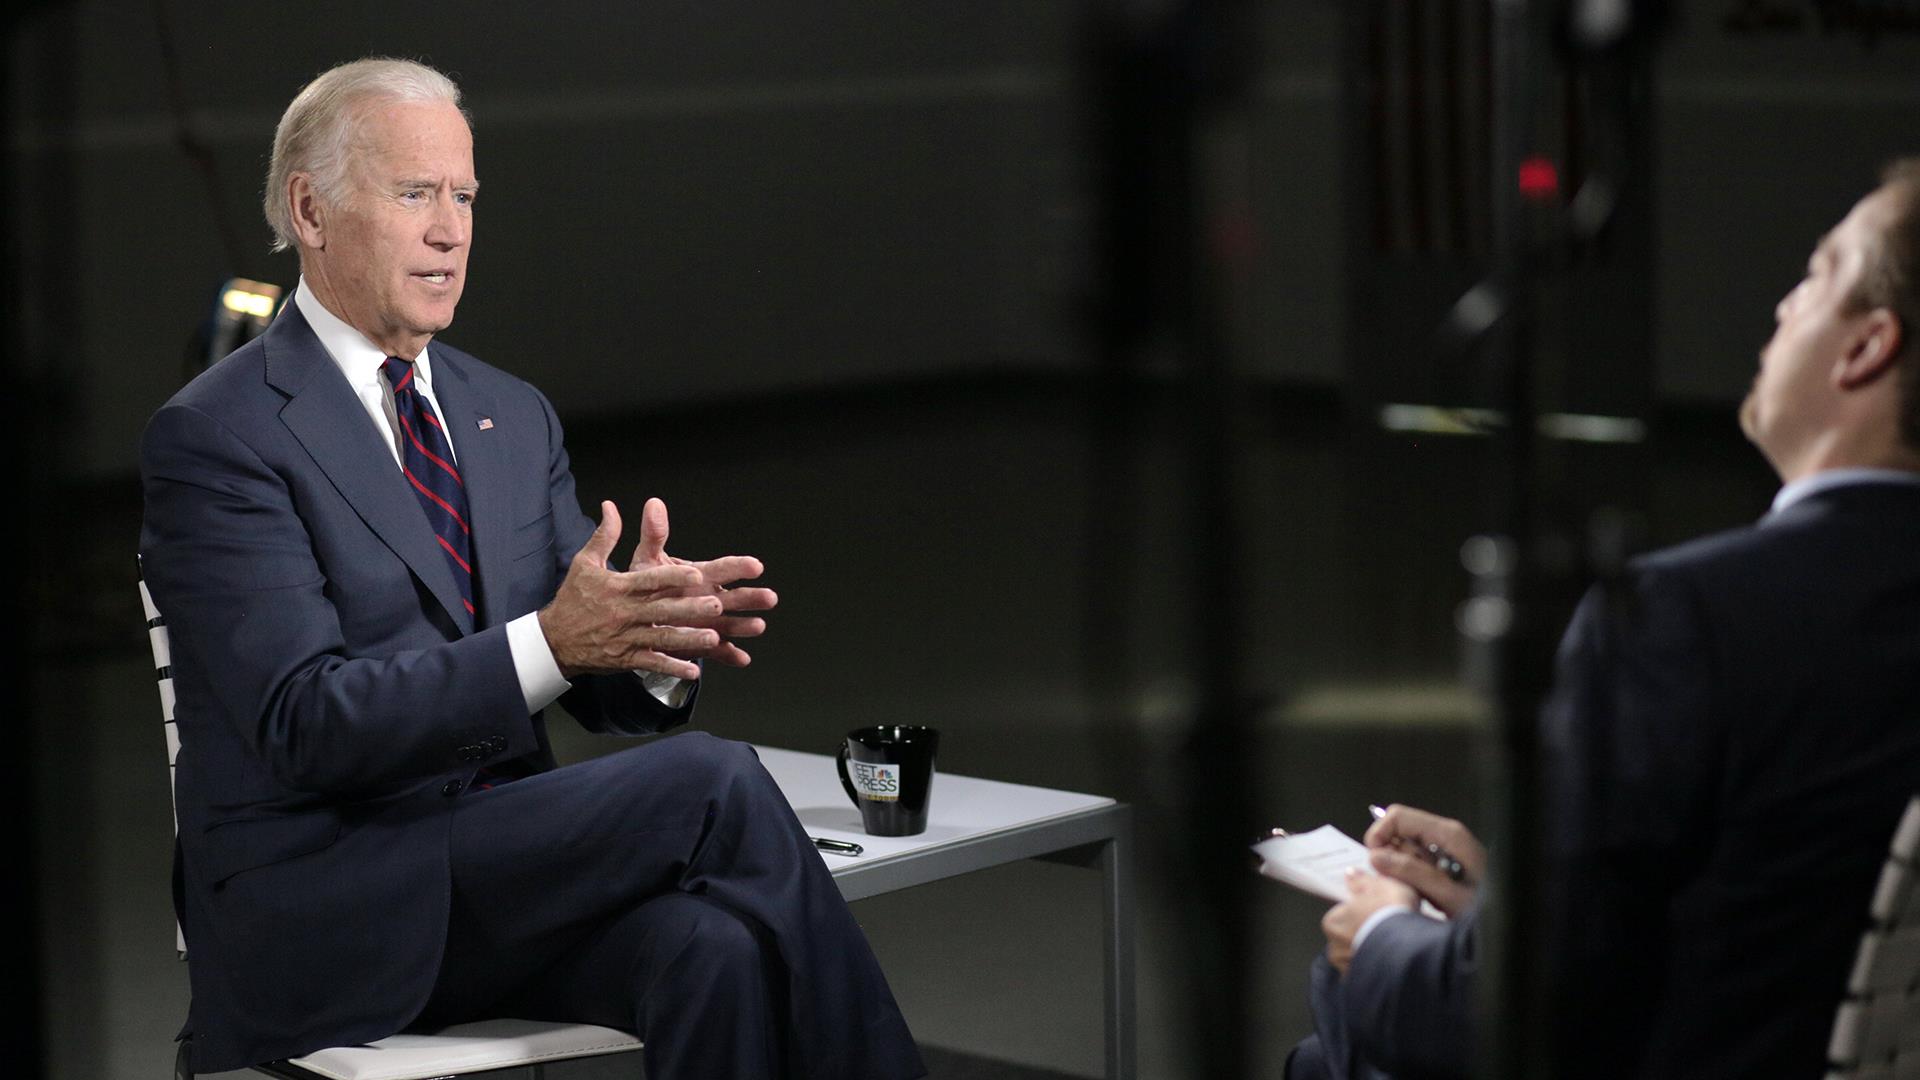 Vice President Biden Full Interview: Trump's Comments Show 'Instinctive Abuse of Power'